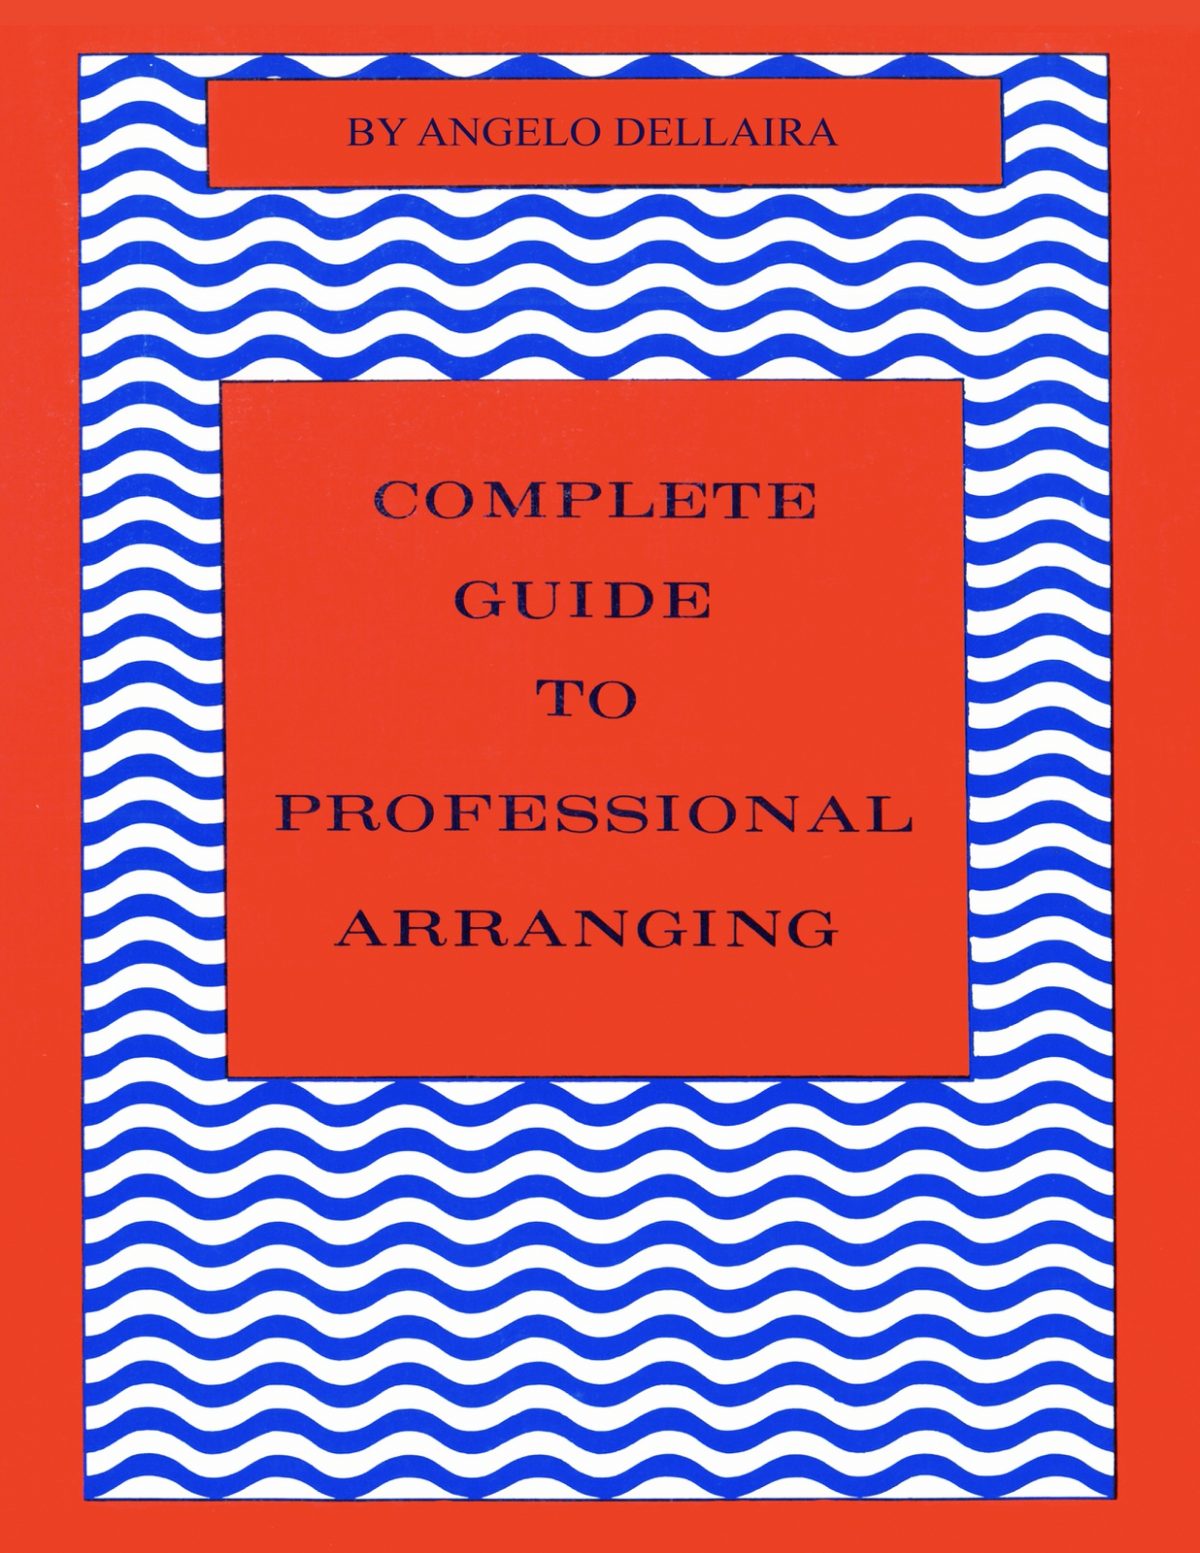 The Complete Guide to Professional Arranging